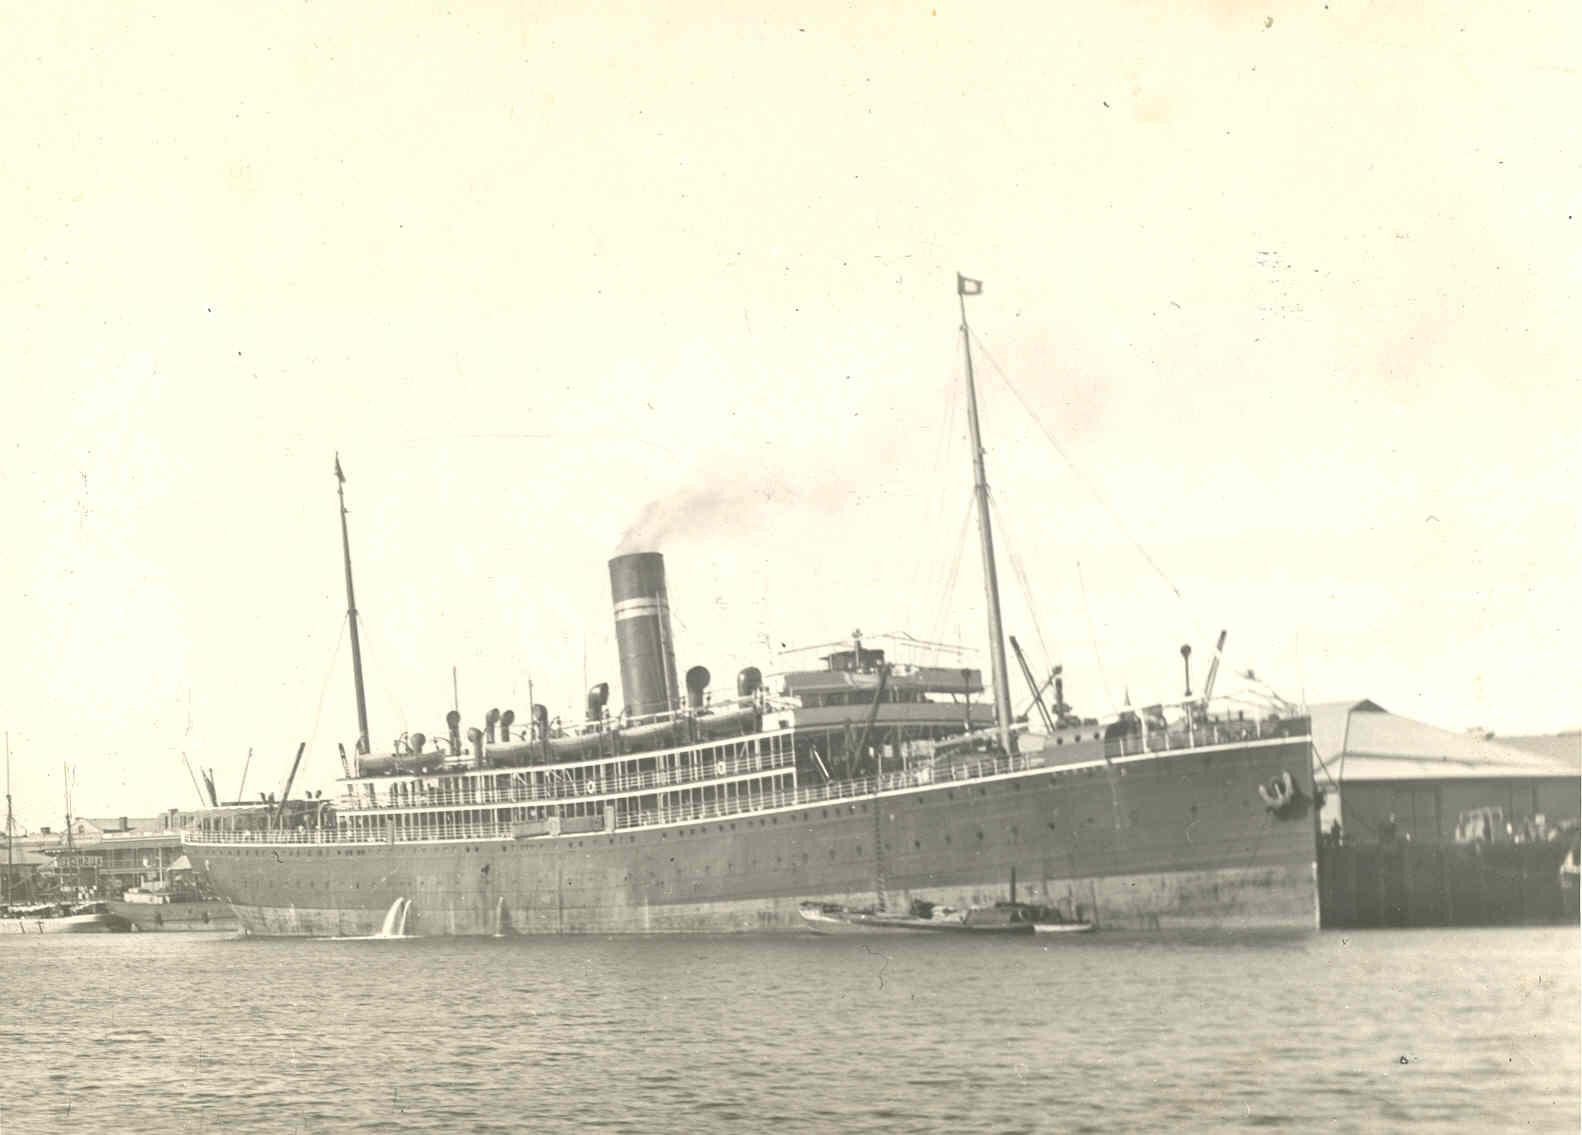 Passenger vessel "Kyarra", built in 1903 by Wm Denny & Bros - Dumbarton, Scotland.  Owned by Australasian United Steam Navigation Co and operated around Australia's coasts.  She took her first voyage in 1903 and was commandeered as a hospital ship in 1914